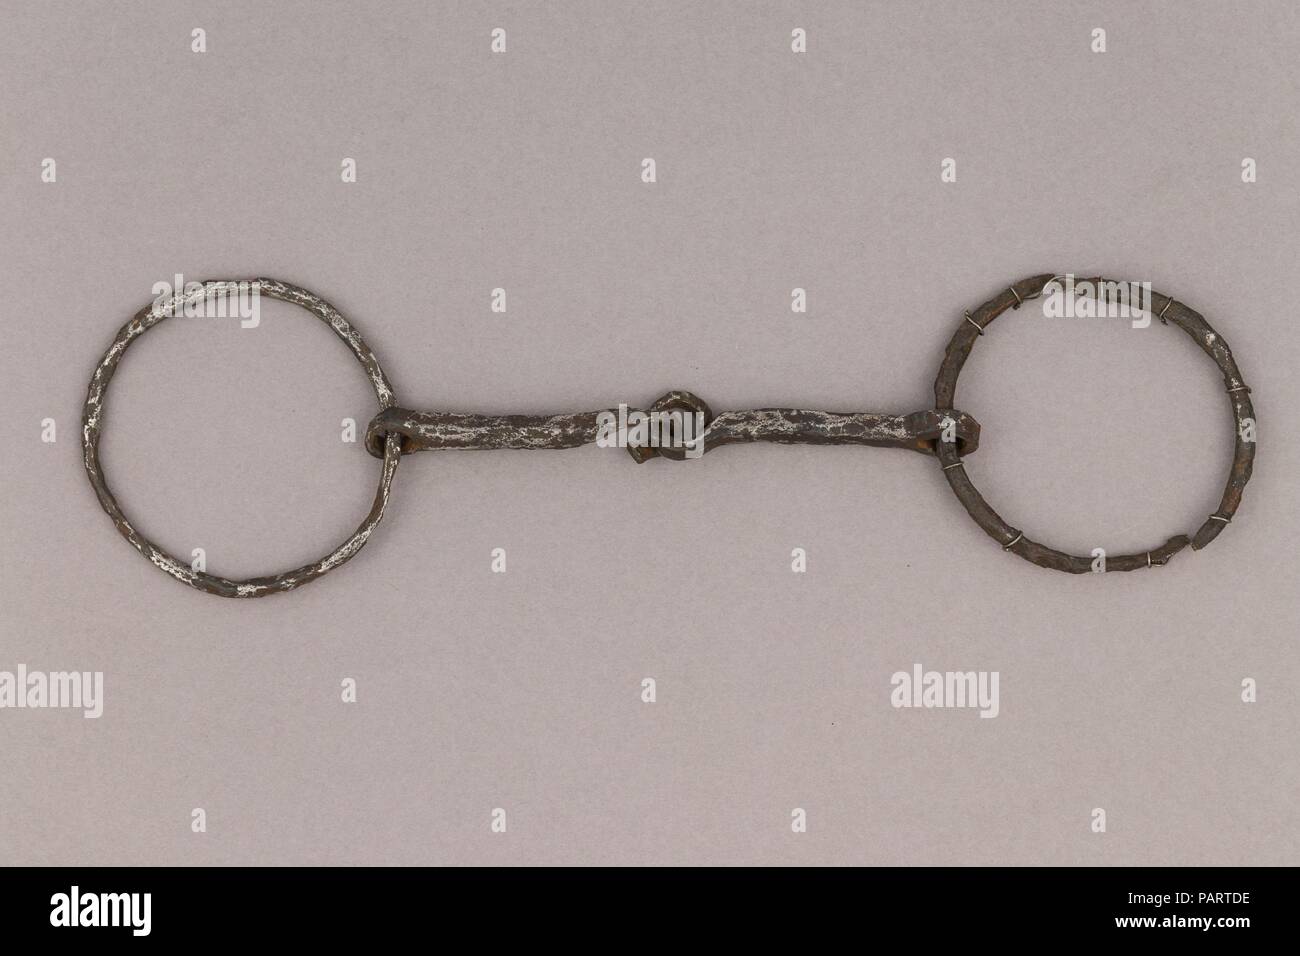 Snaffle Bit. Culture: German. Dimensions: W. 6 1/2 in. (16.5 cm); Wt. 4.8 oz. (136.1 g). Date: 9th-11th century.  If the Vikings are mostly known for being talented sailors, one may forget they were also horse riders, and as in all the Germanic cultures, horses had great importance in their society, in both its social and religious aspects. Equestrian equipment, like stirrups, spurs and bits, are regularly found in Viking burials, among the goods warriors wanted to bring with them to the afterlife. The elite would sometimes even be accompanied by sacrificed horses, a meaningful practice at tha Stock Photo